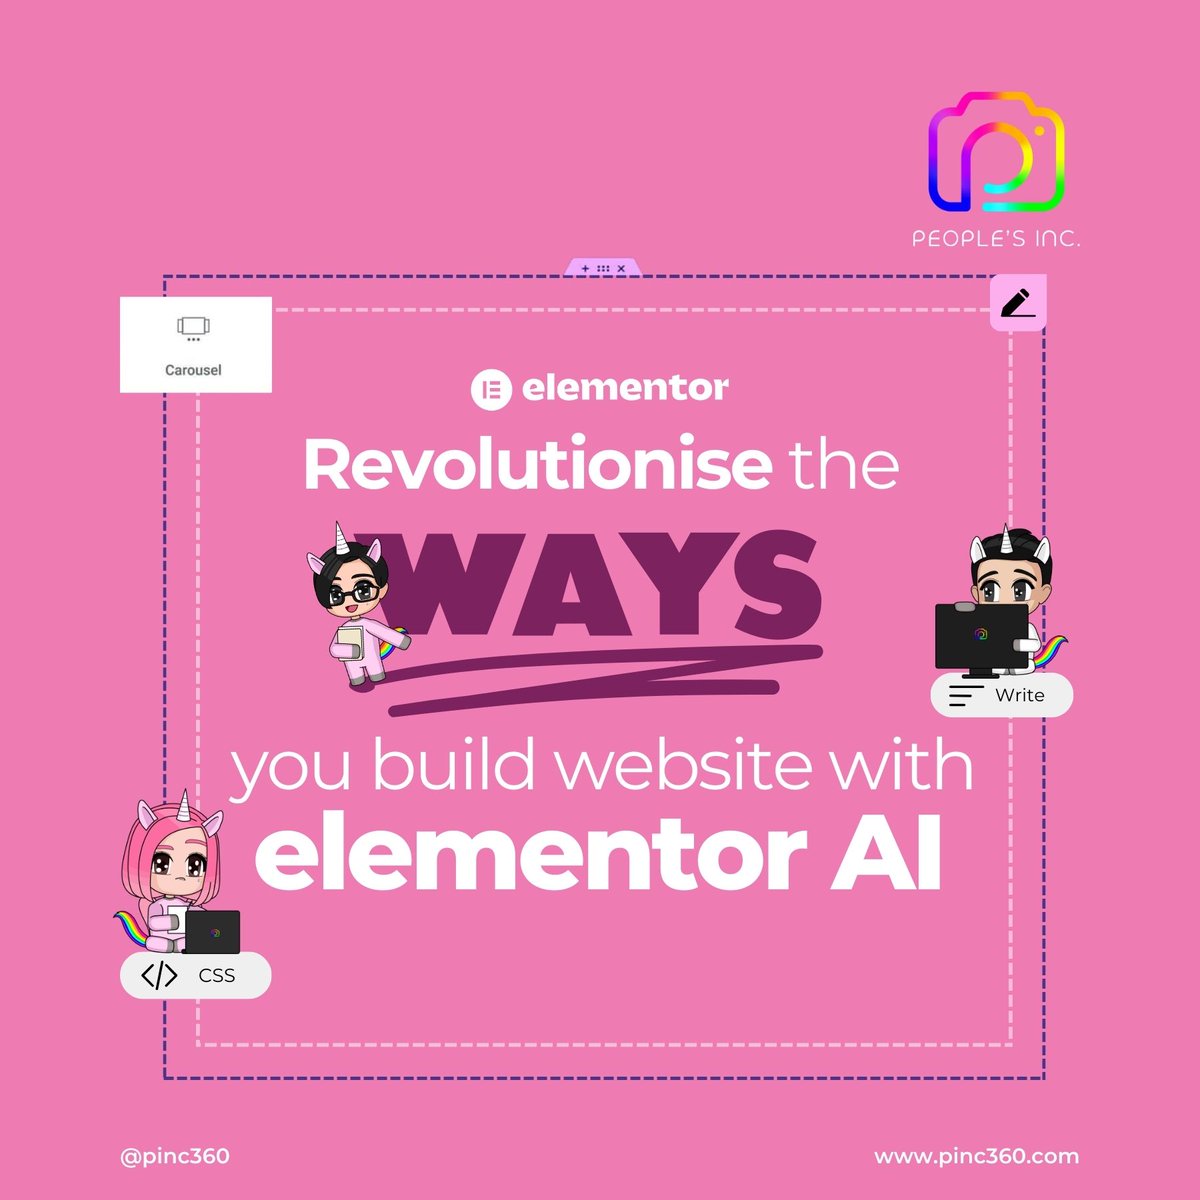 Subscribe to Unify and transform web design with #ElementorAI! 🚀✨ Get AI-generated content, custom coding, and creative tools at your fingertips. Plus, a free website setup!👩‍💻 Sign up here: pinc360.com/unify/offer #WebsiteRevolution #PINC360 #UnifySubscription